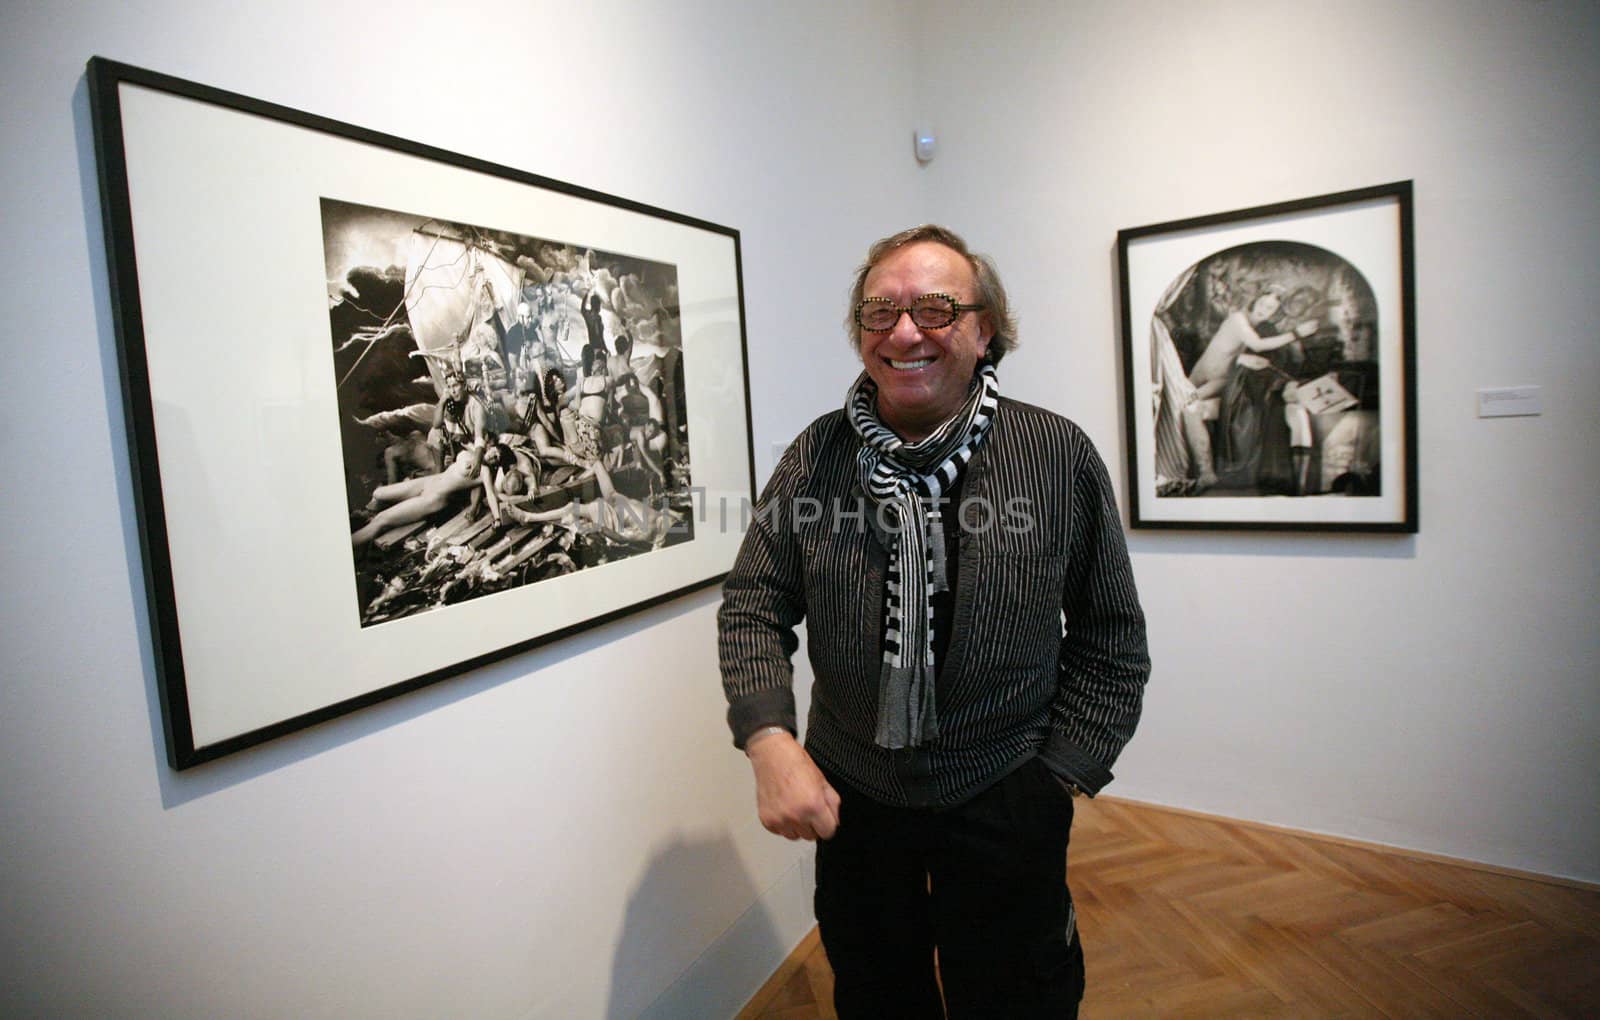 BRNO, CZECH REPUBLIC, SEPT. - 30: American photographer Joel Peter Witkin opens his exposition in Brno Art House, on Thursday, Sept. 30, 2010. by haak78